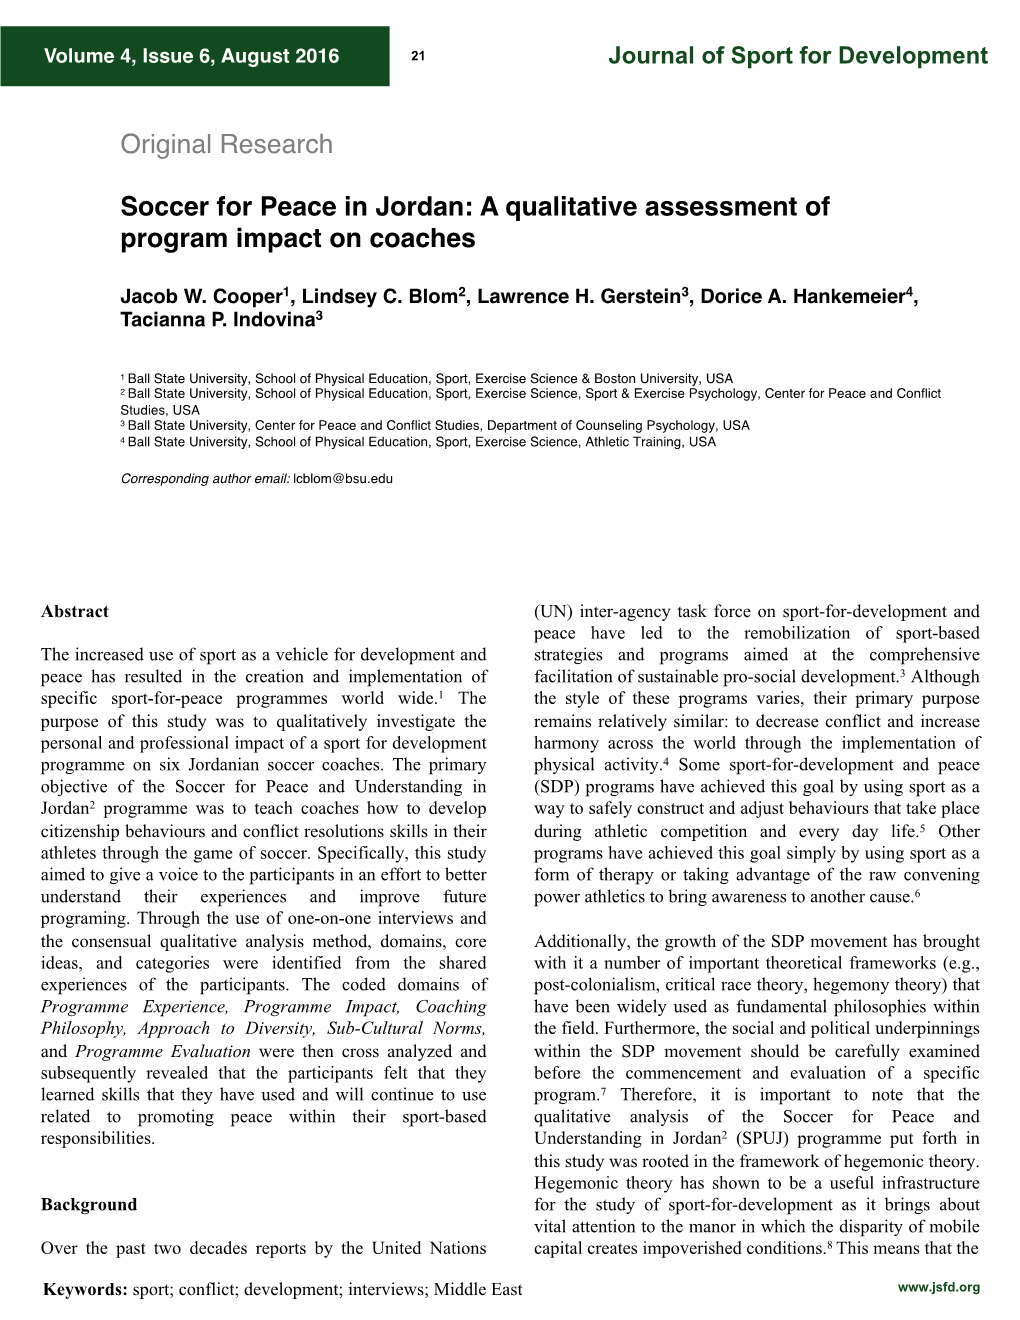 Soccer for Peace in Jordan: a Qualitative Assessment of Program Impact on Coaches